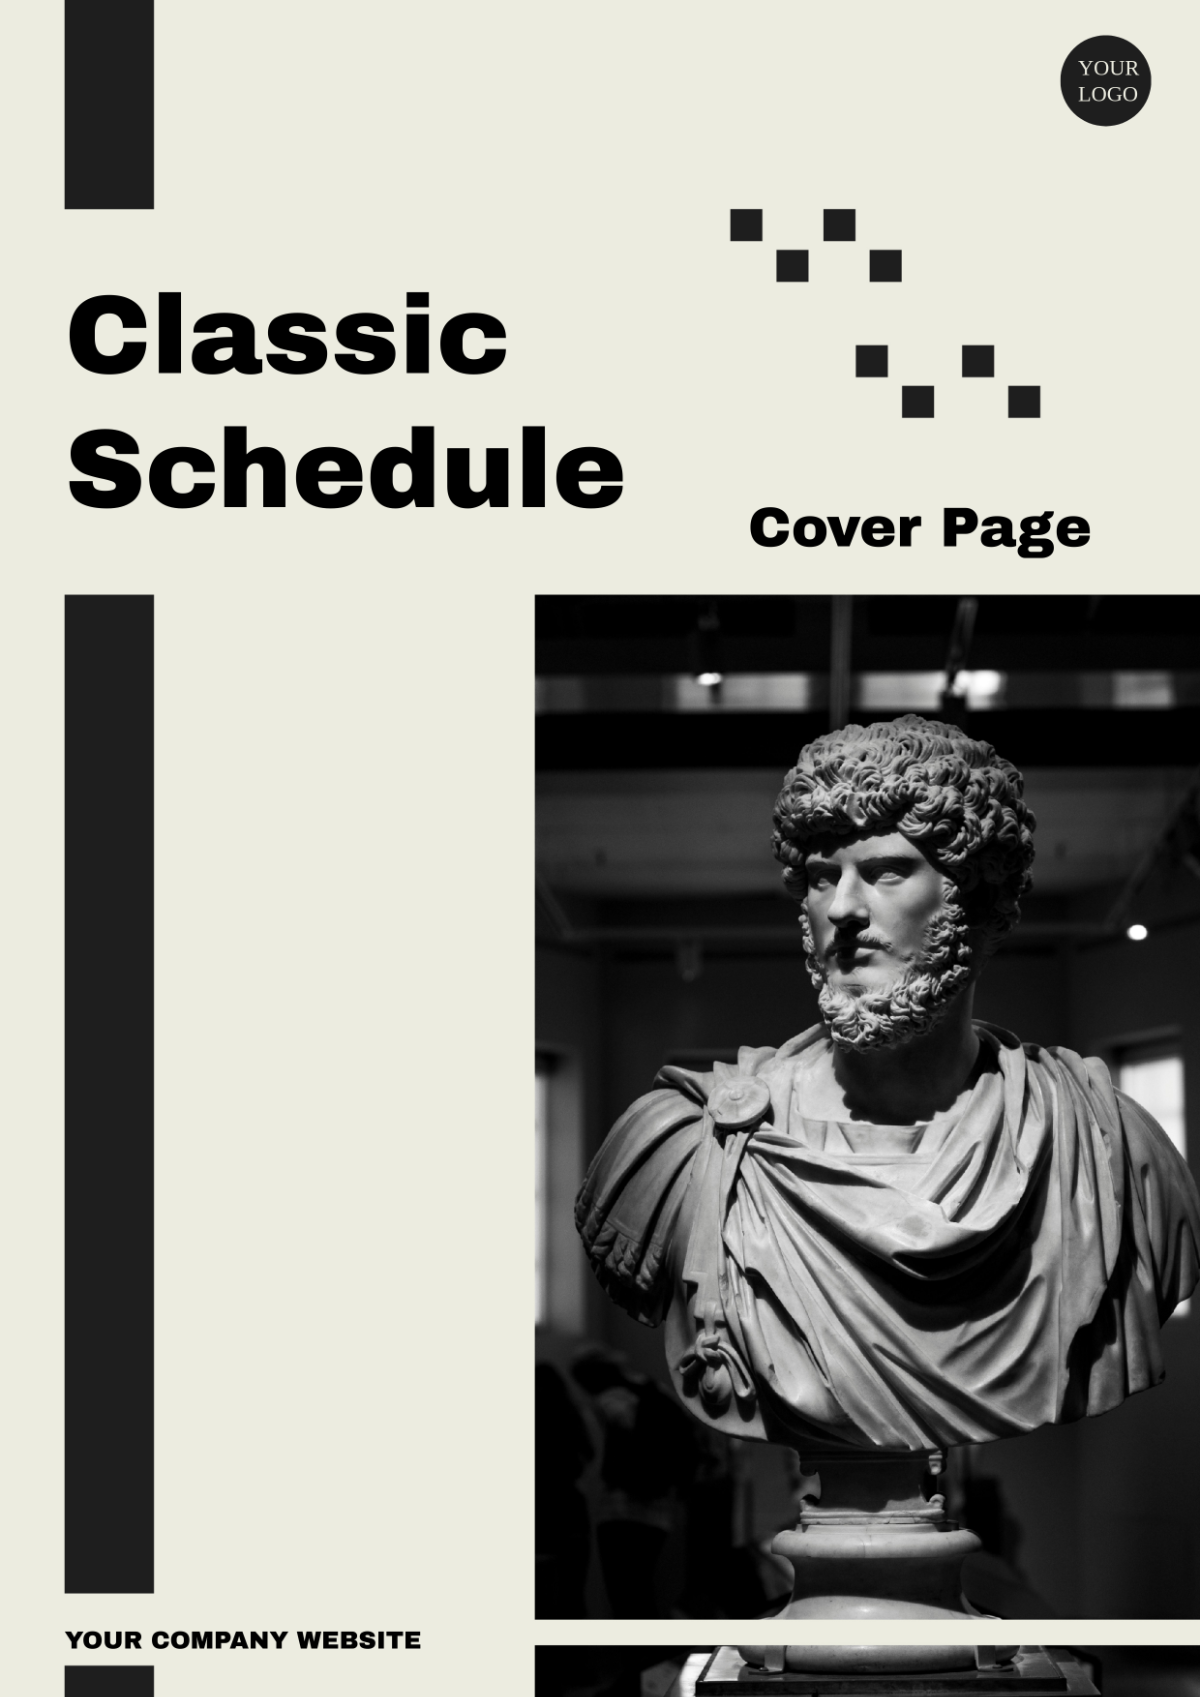 Classic Schedule Cover Page